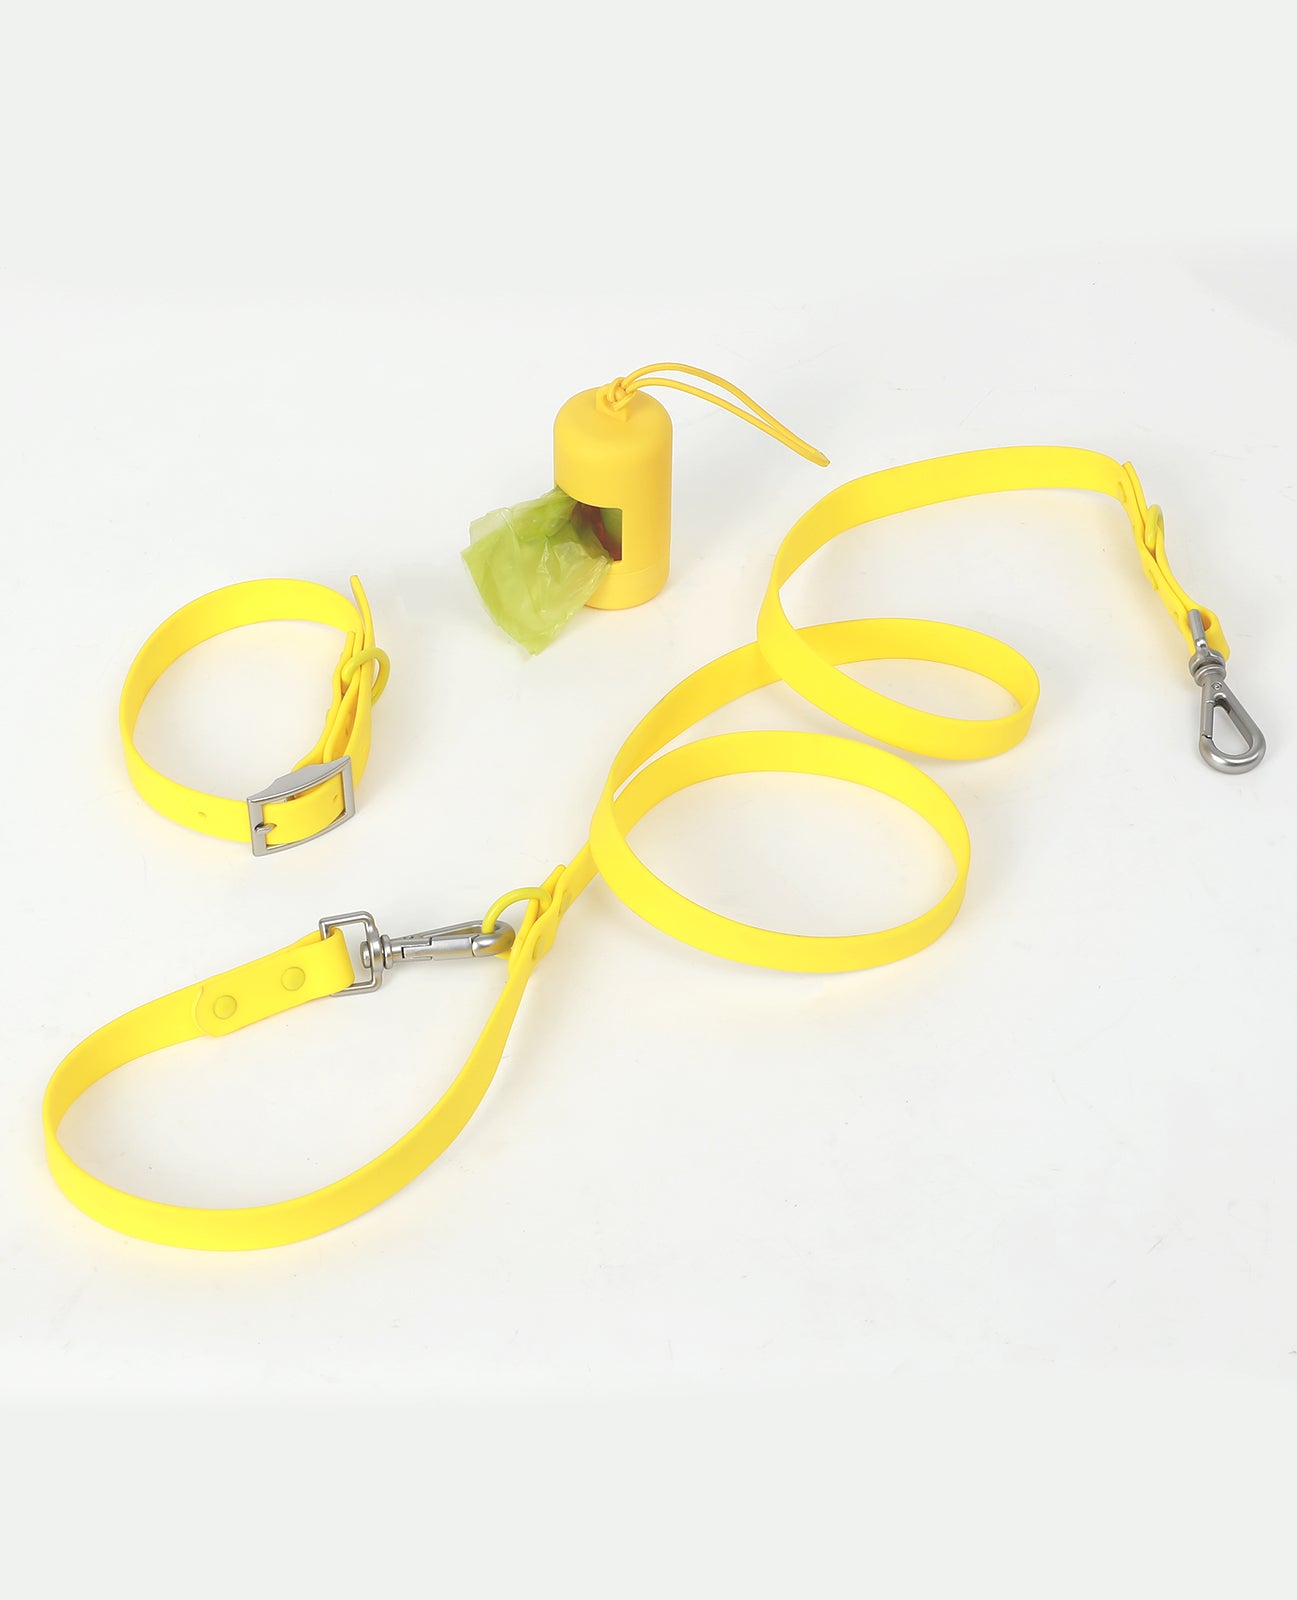 Poop Bag Carrier - Sunny Yellow